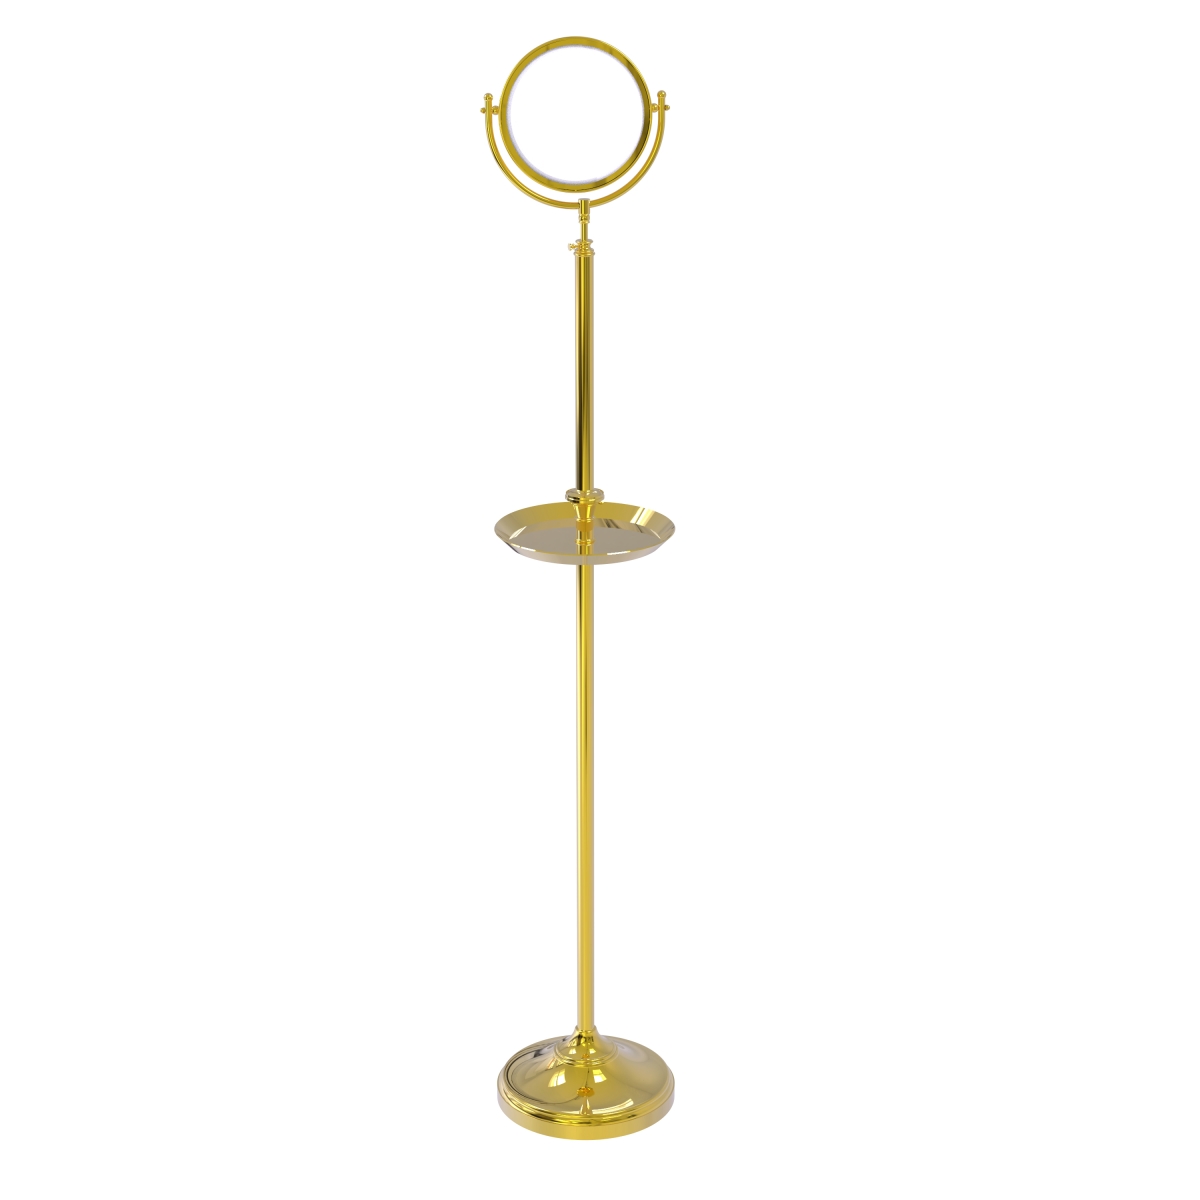 Allied Brass DMF-3-3X-UNL Floor Standing Make-Up Mirror 8 in. Diameter with 3X Magnification & Shaving Tray, Unlacquered Brass